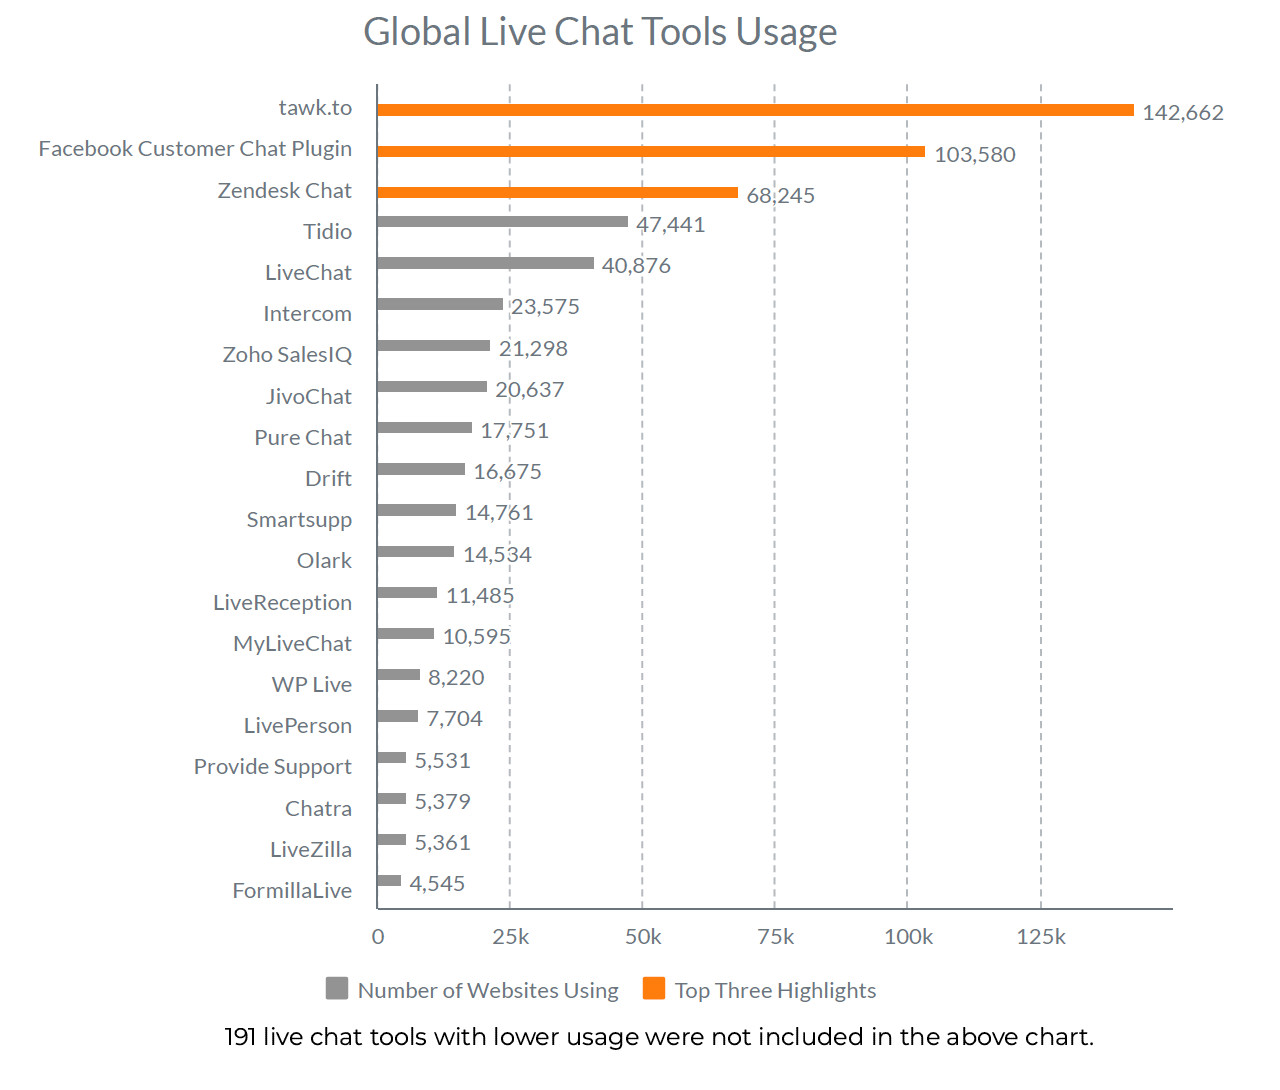 buildops marketing trends live chat tools usage global